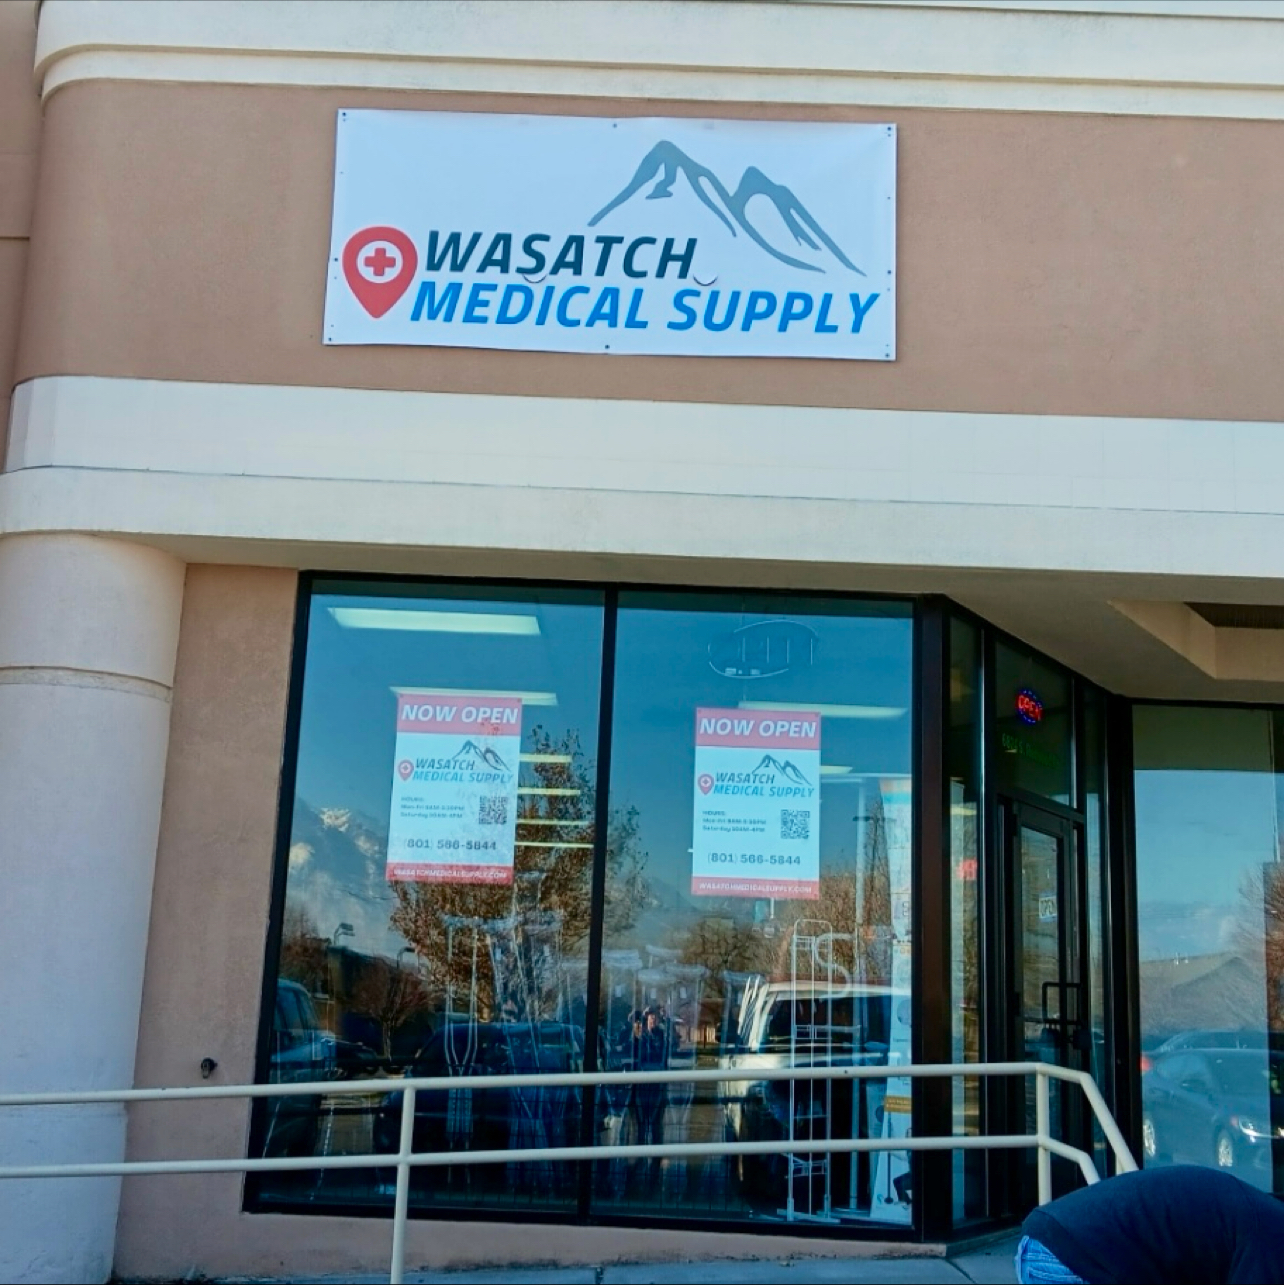 Wasatch Medical Supply